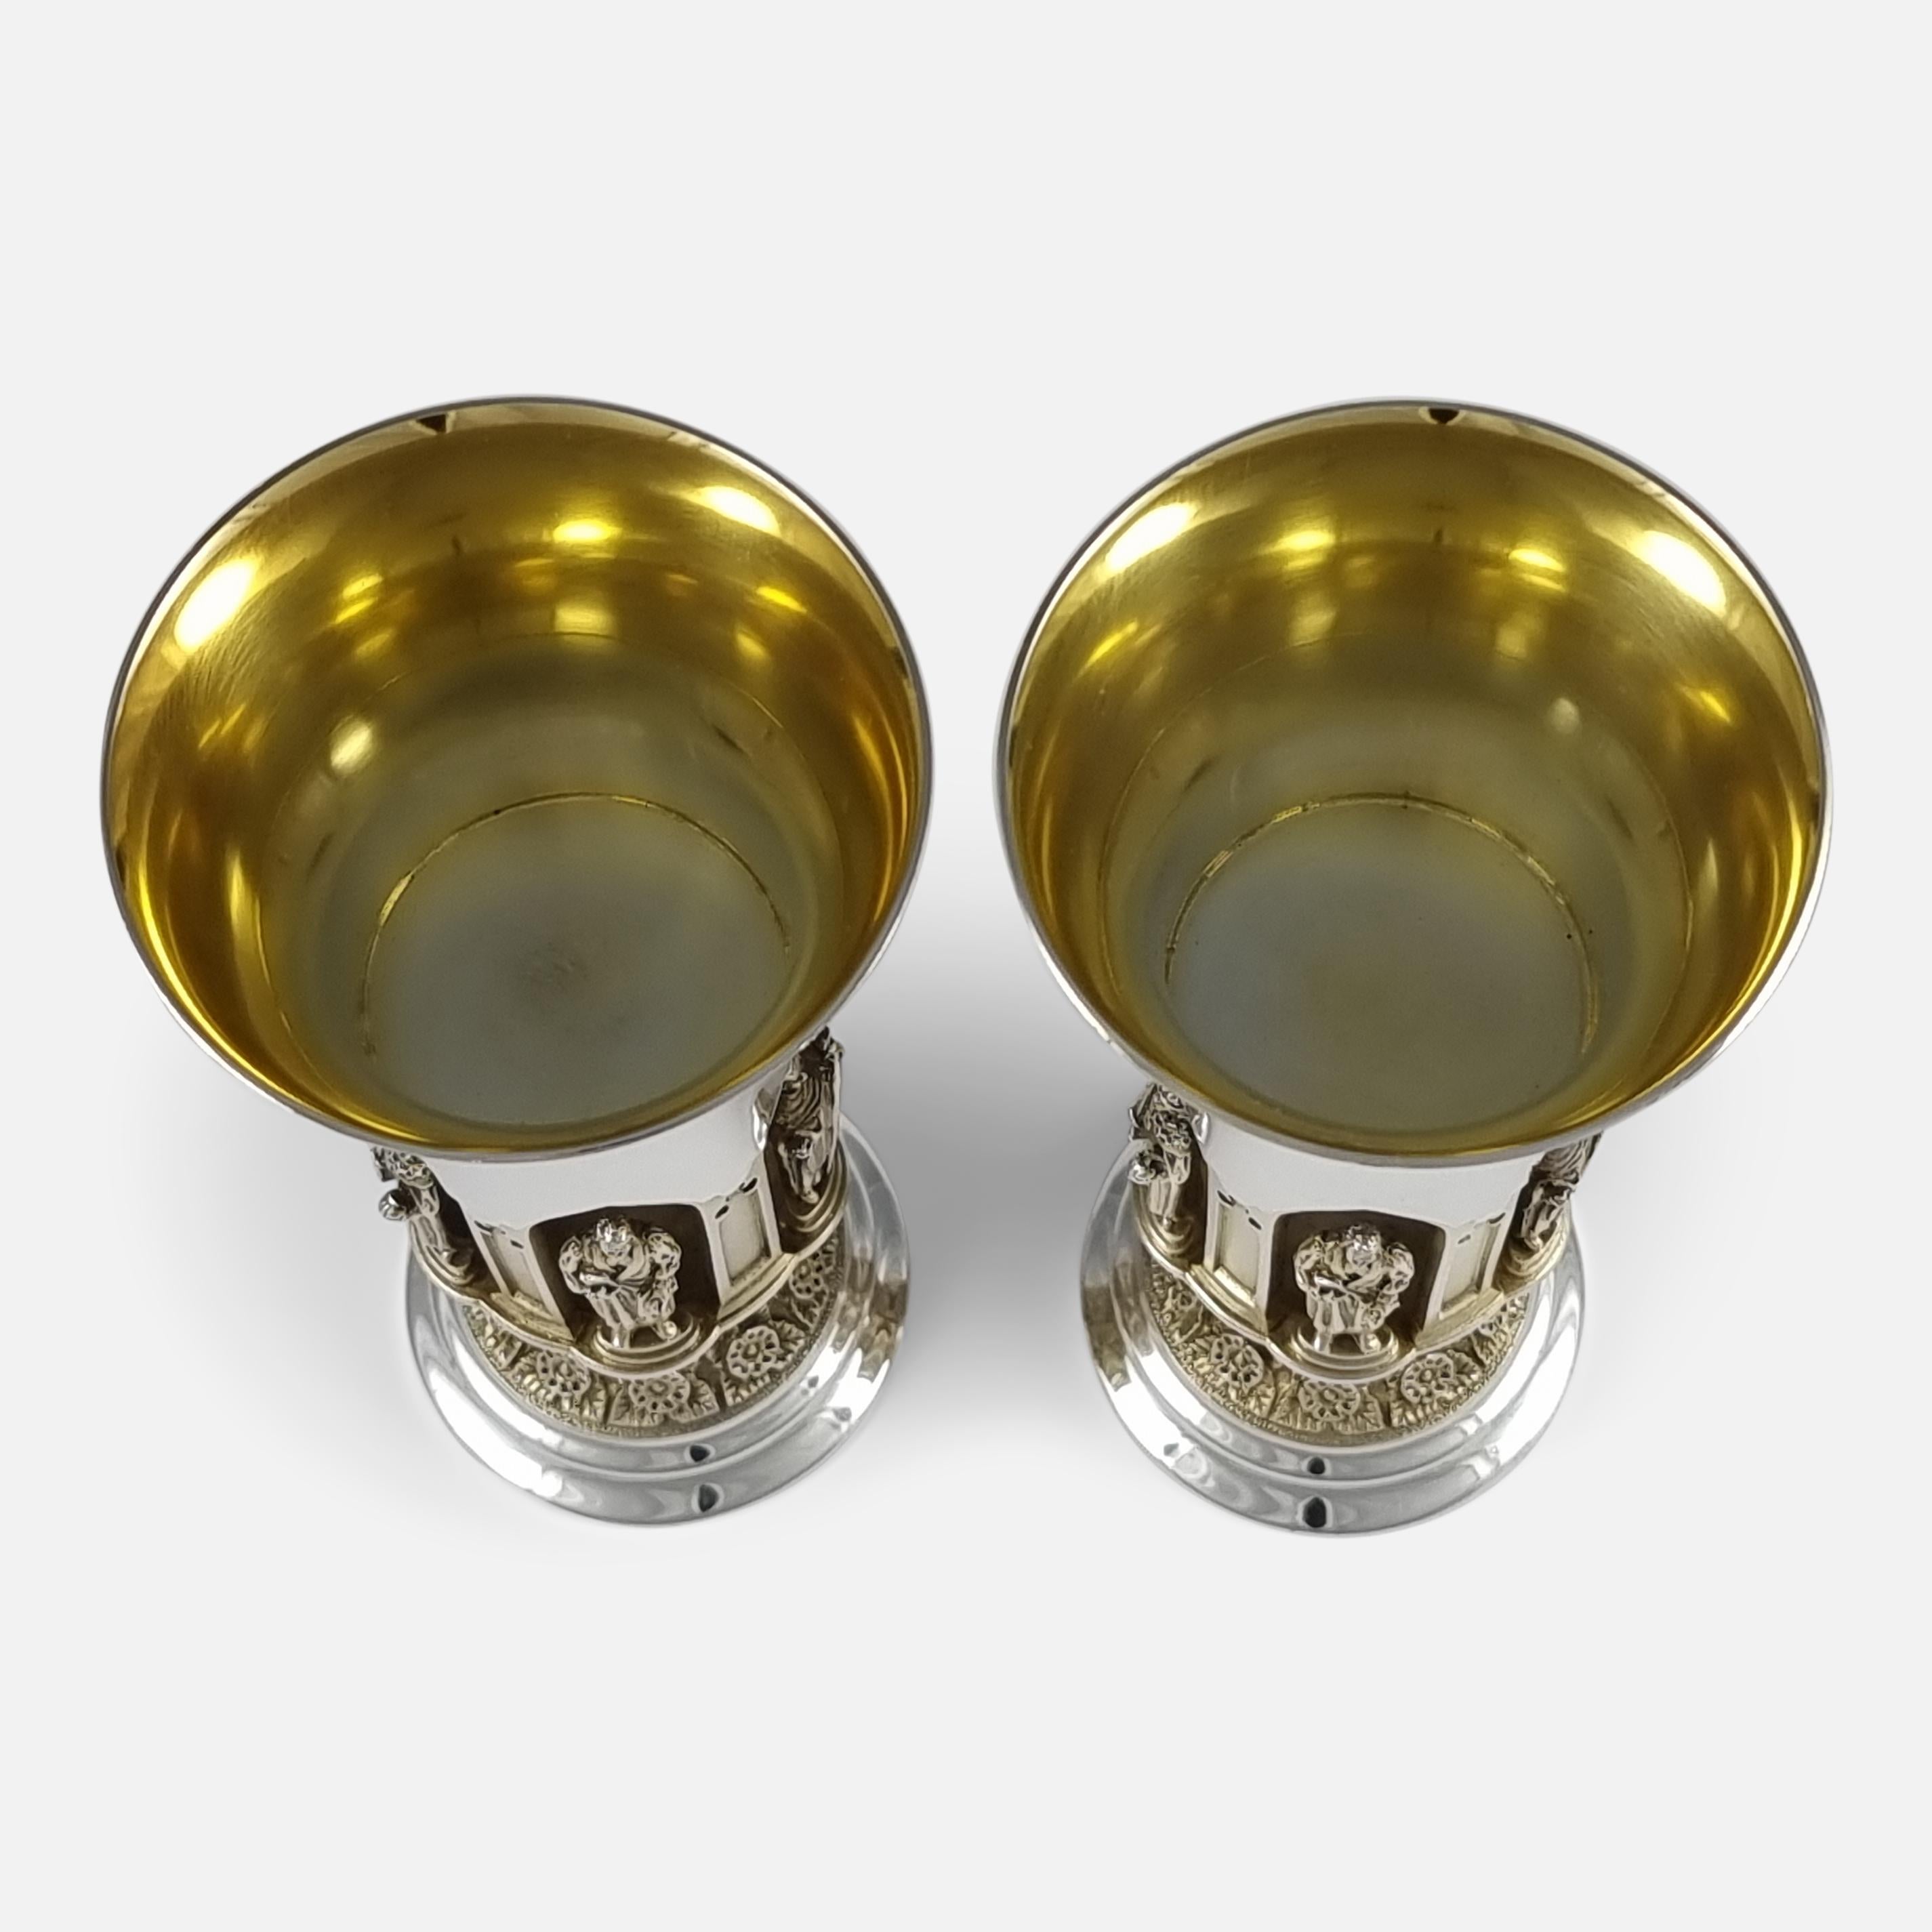 Pair of Aurum Silver Gilt 'Ripon Diocese Foundation' Goblets by Hector Miller 2